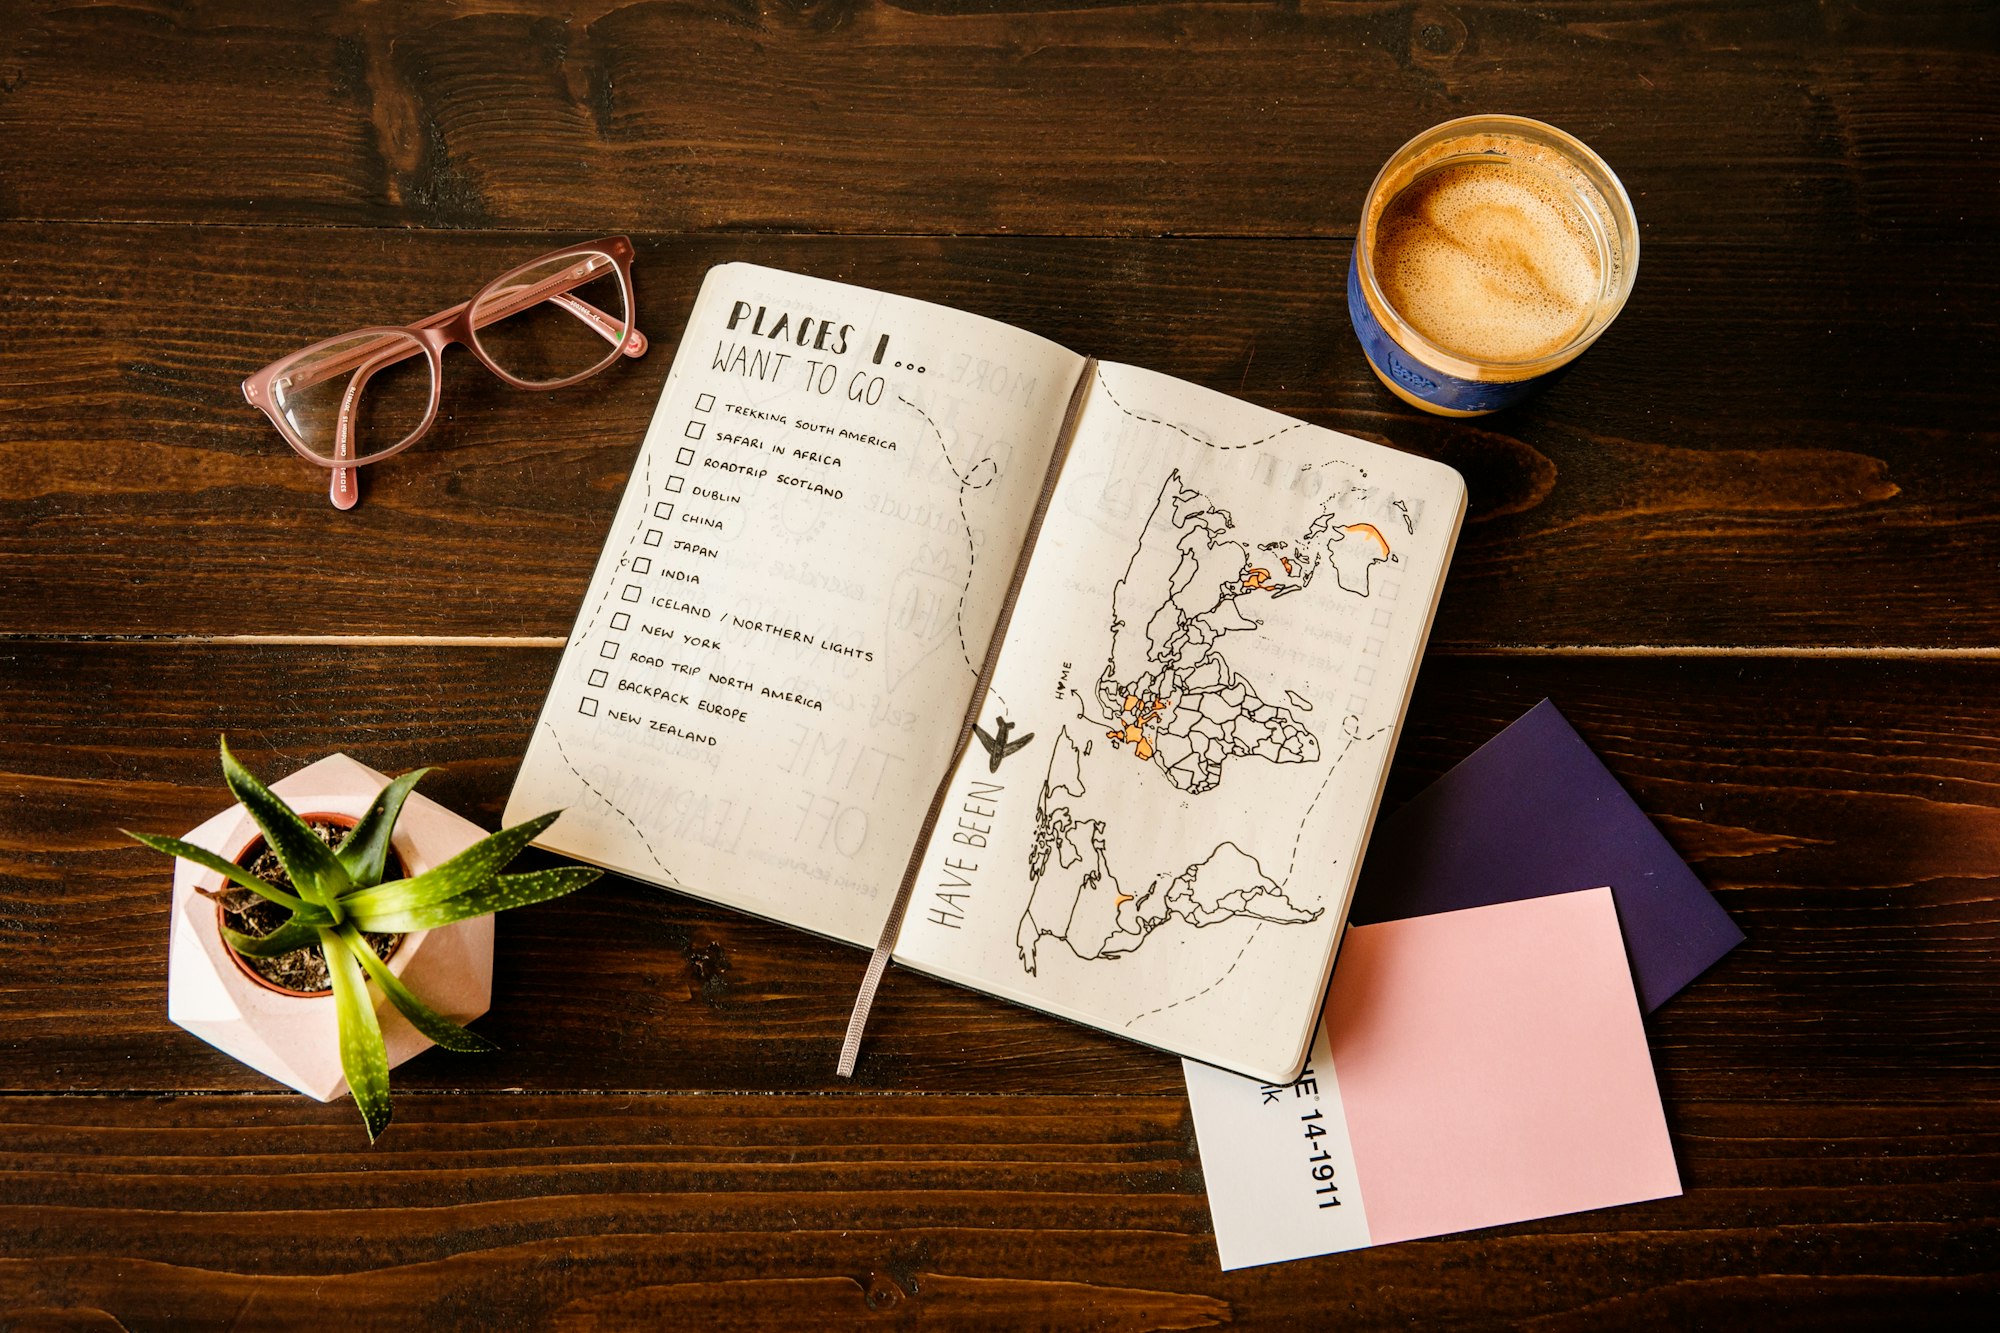 A travel planner with all the travel destinations around the world